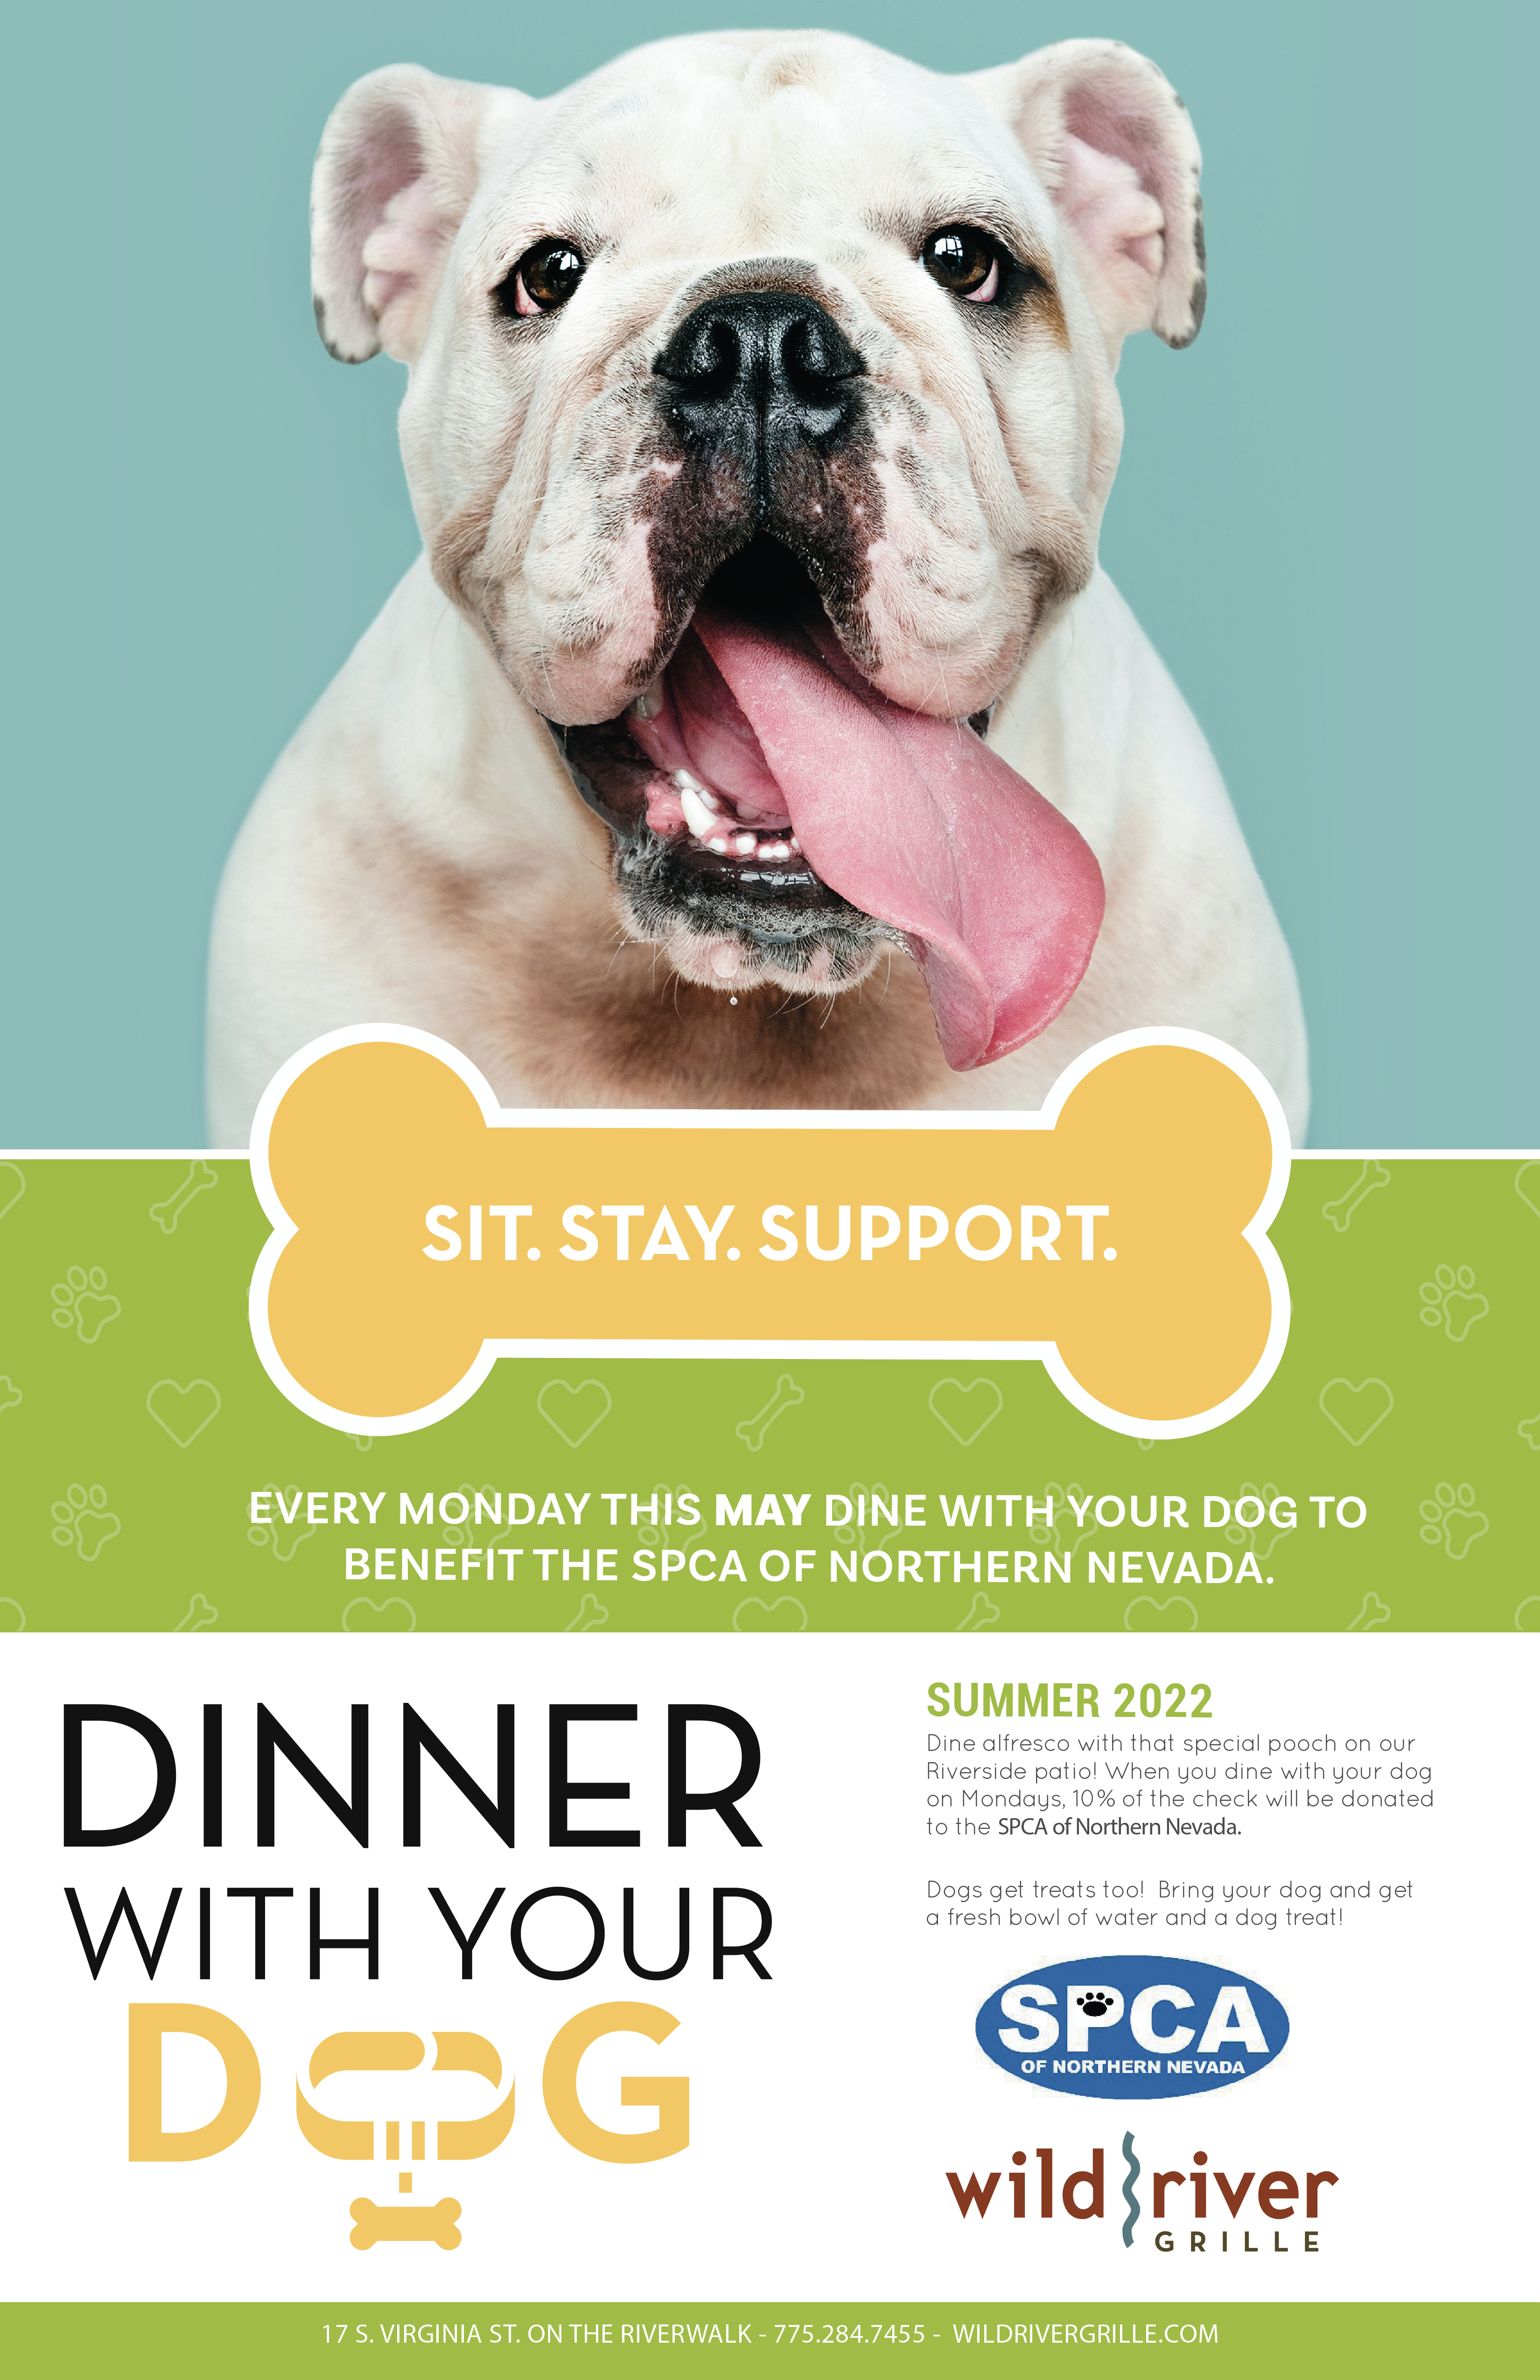 Dinner With Your Dog